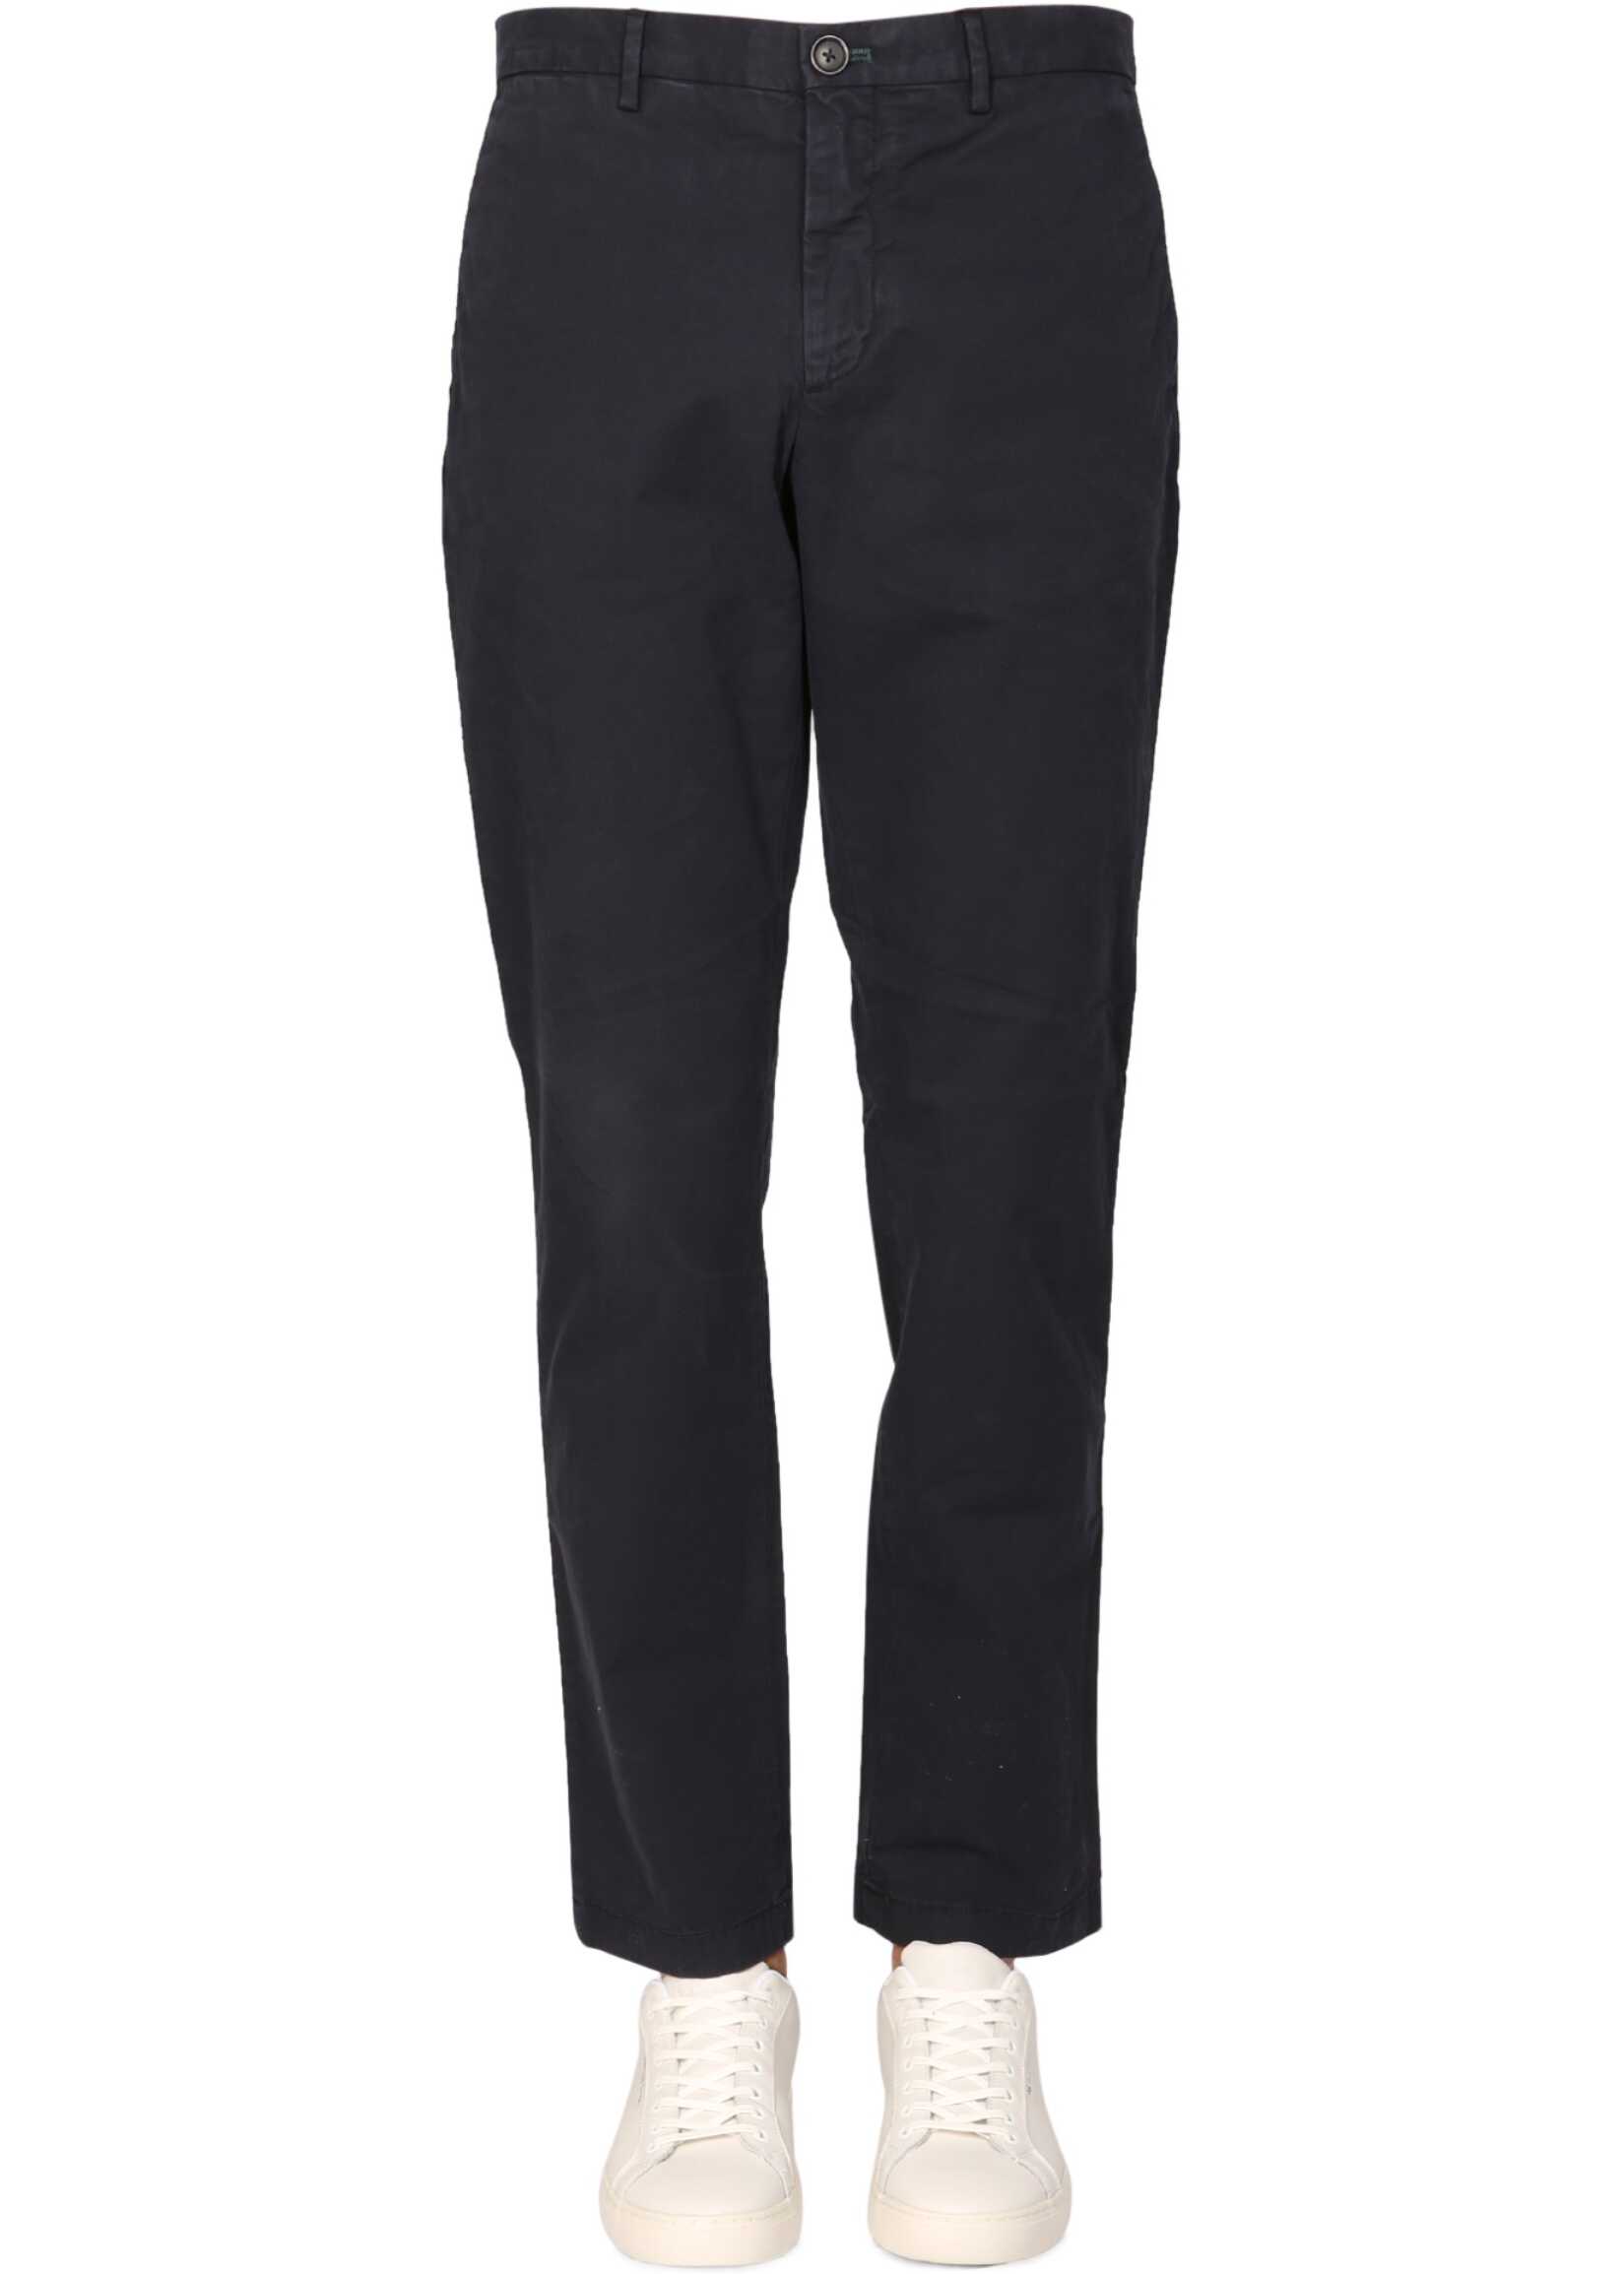 PS by Paul Smith Regular Fit Pants BLUE